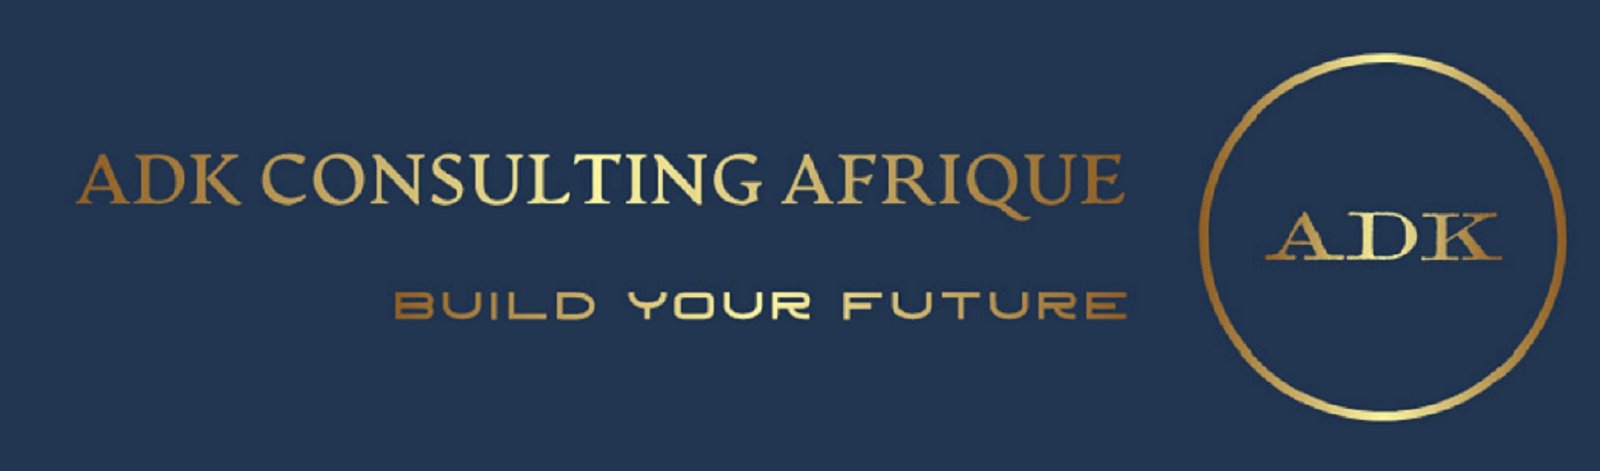 ADK Consulting Afrique